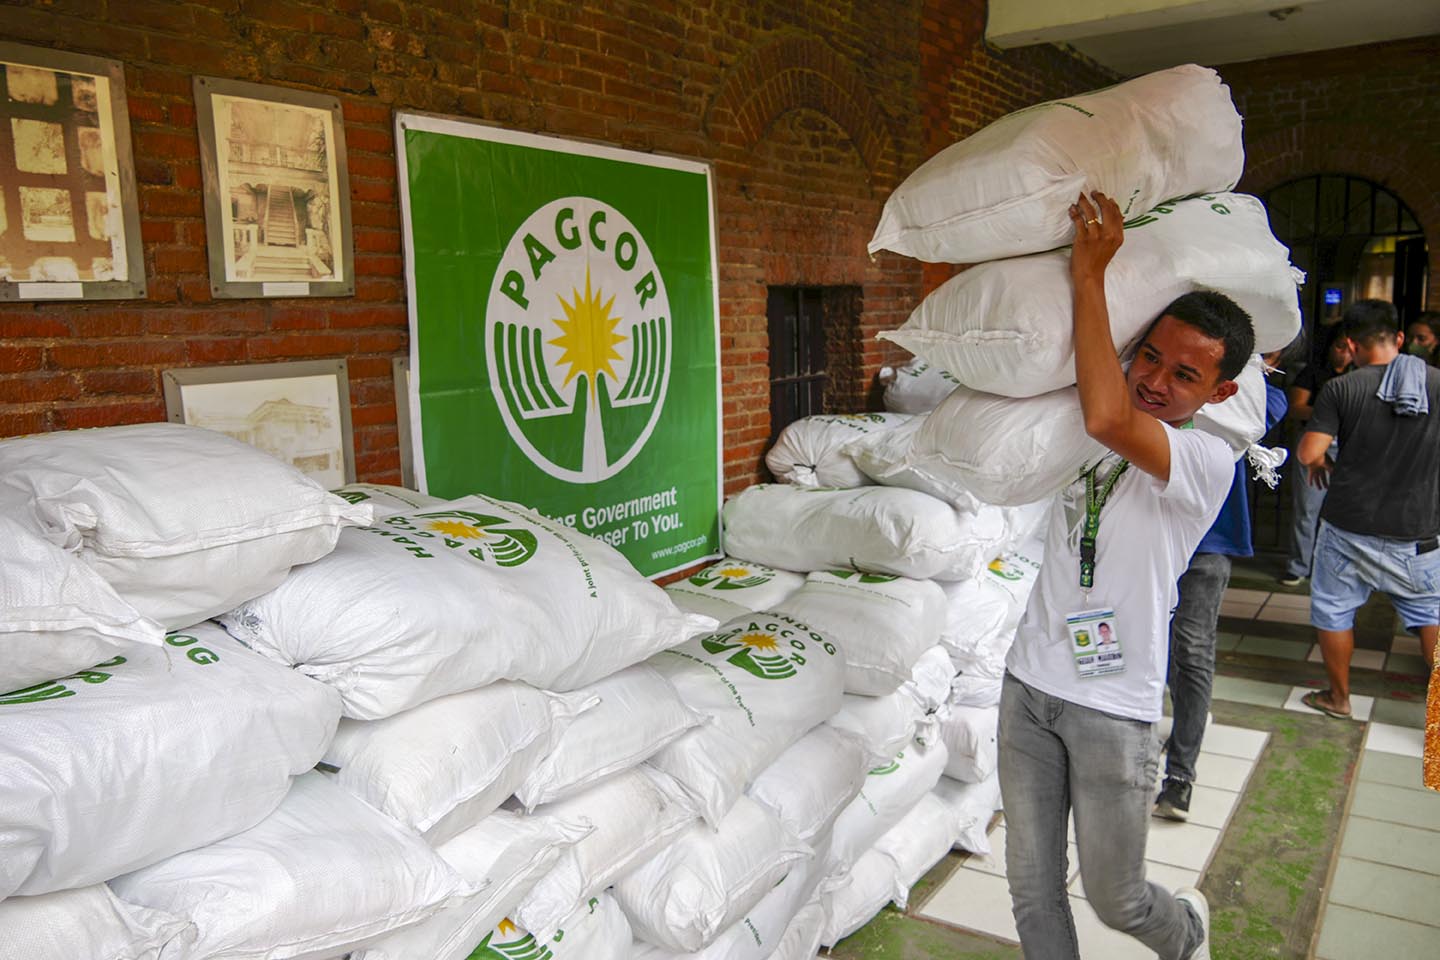 PAGCOR representative distributes relief packages to areas affected by the Super Typhoon.